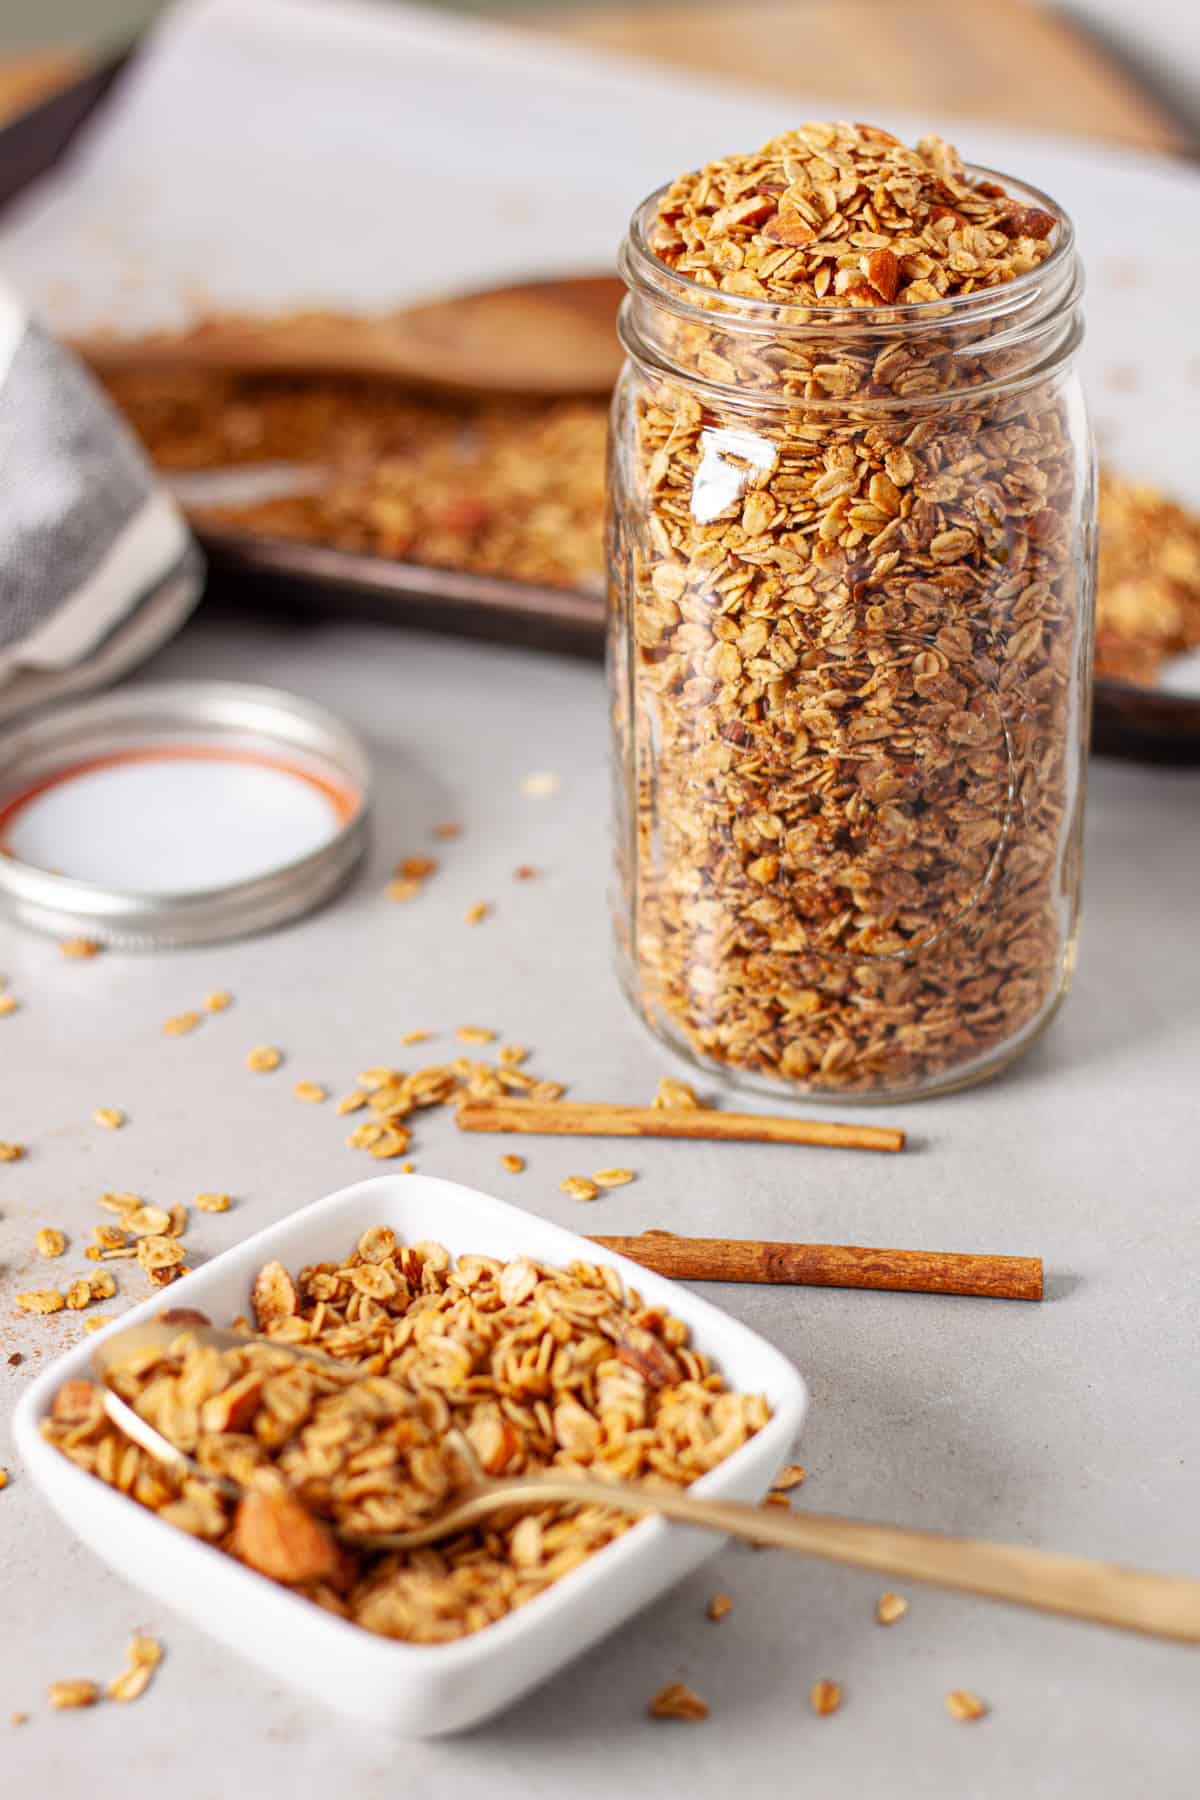 Homemade cinnamon granola in a large mason jar with a small bowl in the foreground.